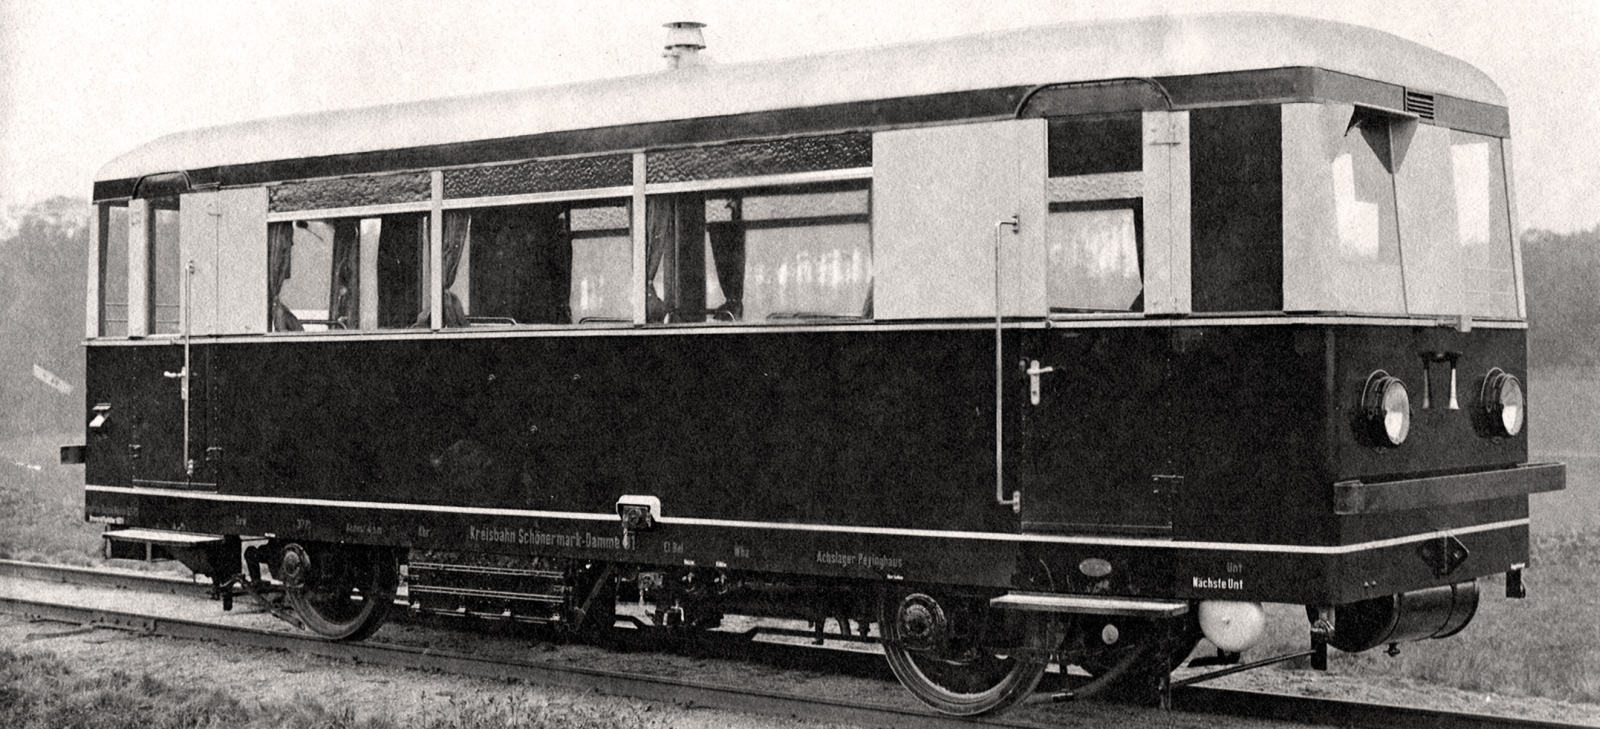 Works photo of the railcar T 01 of the district railway Schönermark-Damme